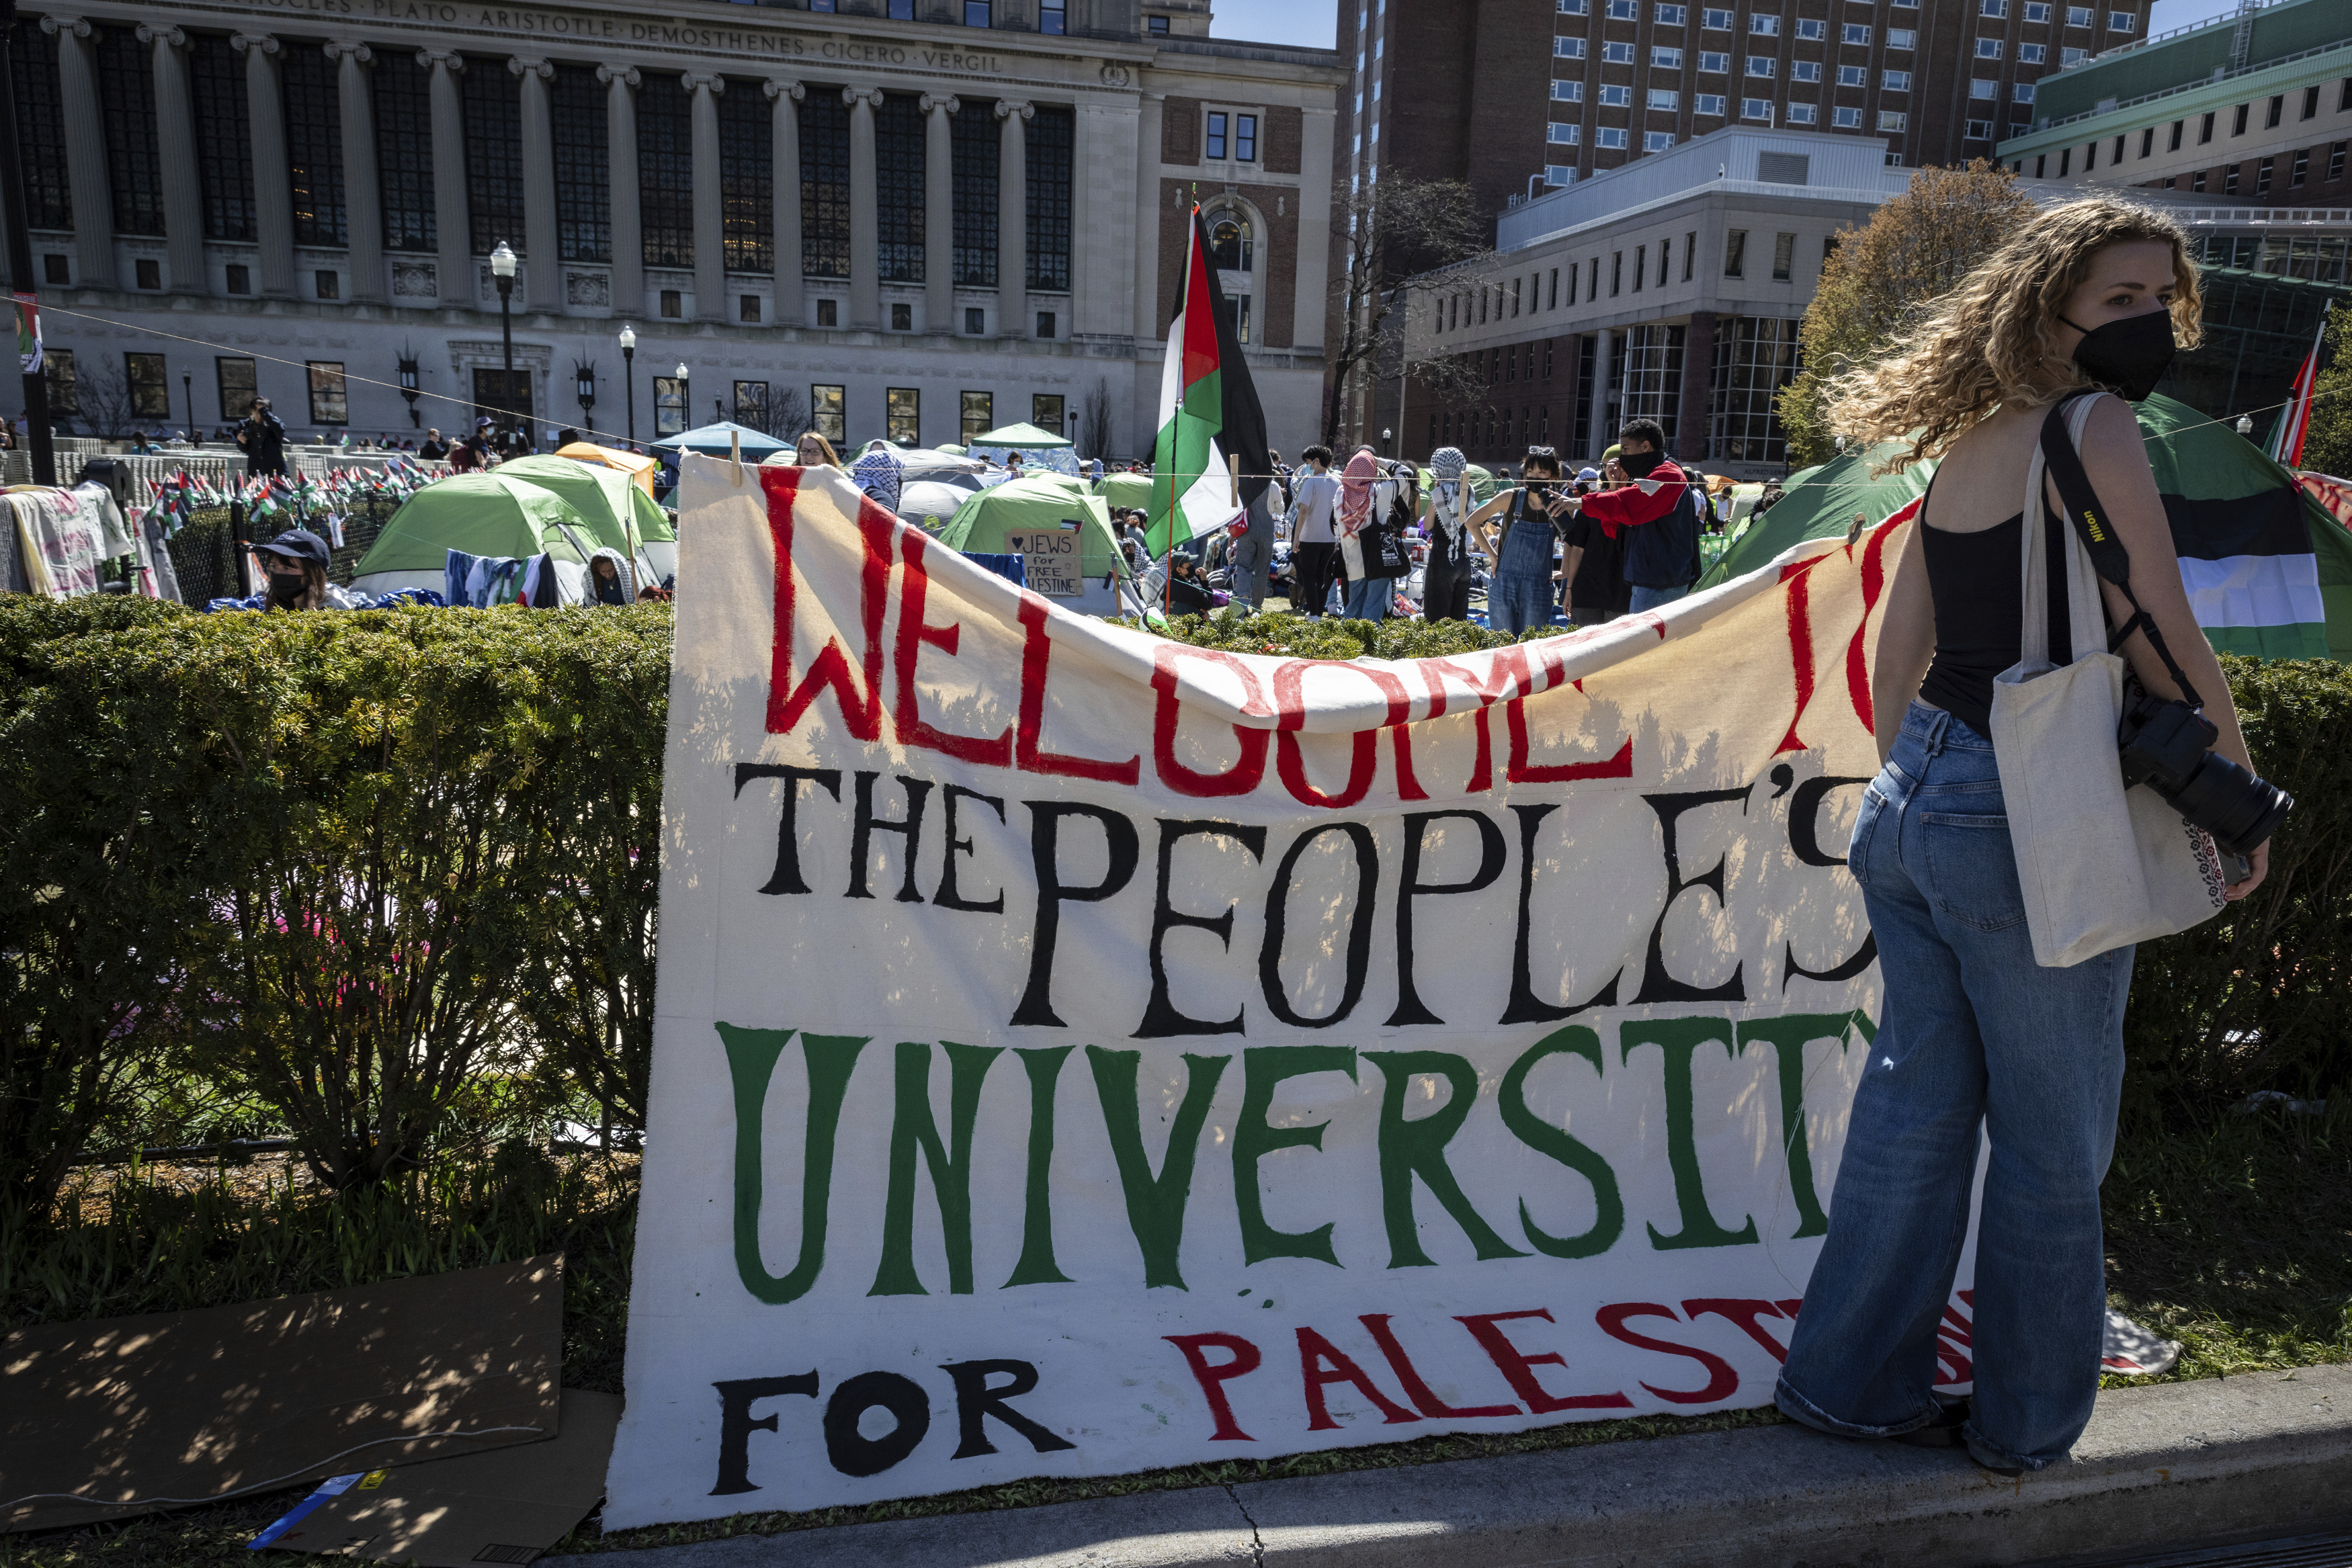 A sign is displayed in front of the tents erected at the pro-Palestinian demonstration encampment at Columbia University in New York,